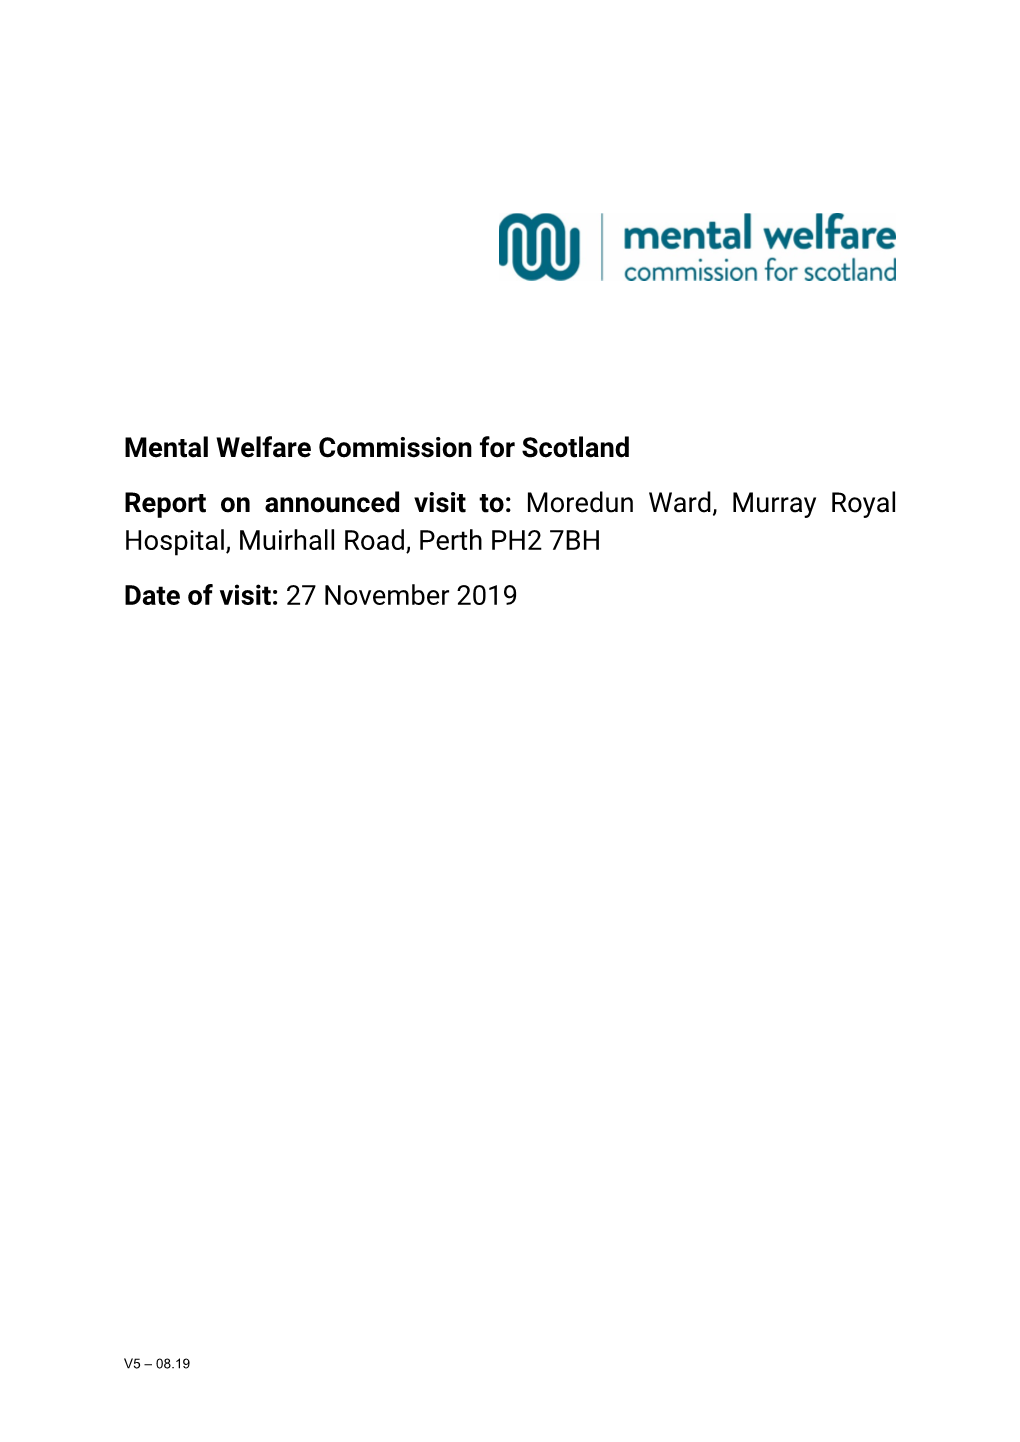 Mental Welfare Commission for Scotland Report on Announced Visit To: Moredun Ward, Murray Royal Hospital, Muirhall Road, Perth P